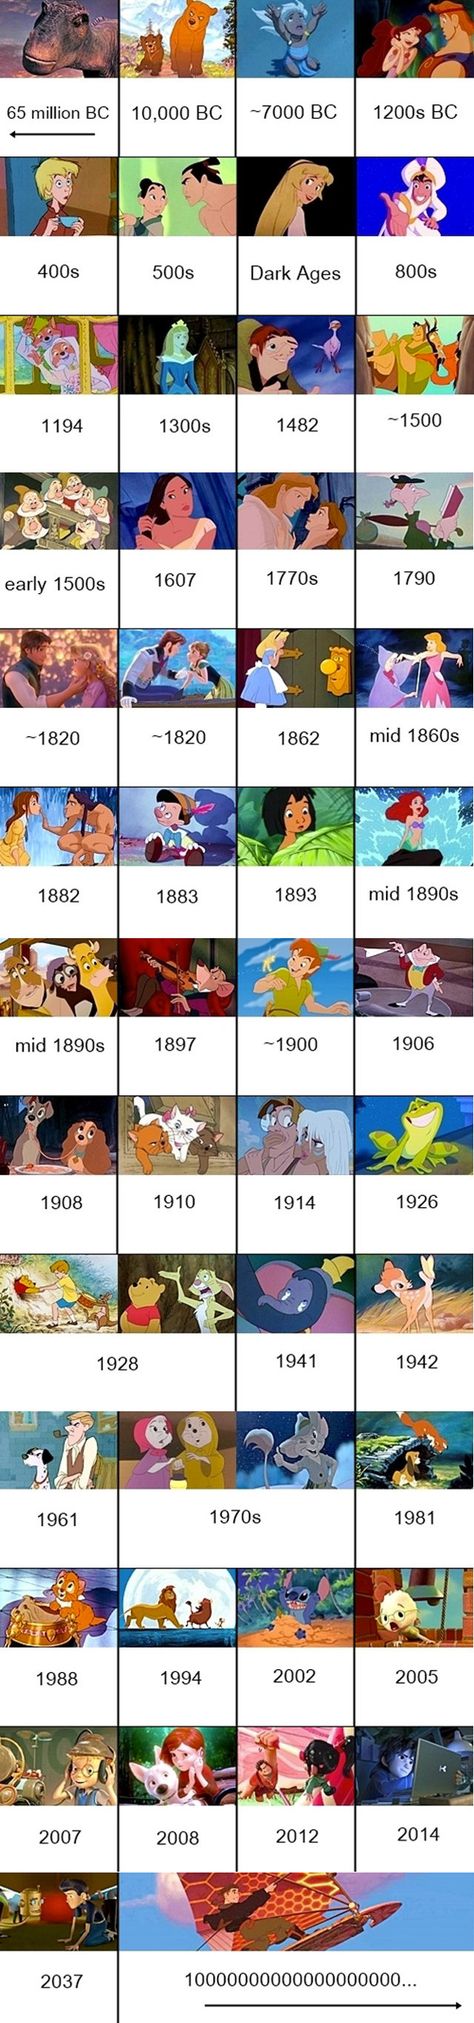 Learning By Looking: All Disney Movies In Chronological Order Of When They Took Place | Geekologie Disney Timeline, Disney Amor, All Disney Movies, Foto Disney, Disney Theory, 디즈니 캐릭터, Images Disney, Prințese Disney, Karakter Disney